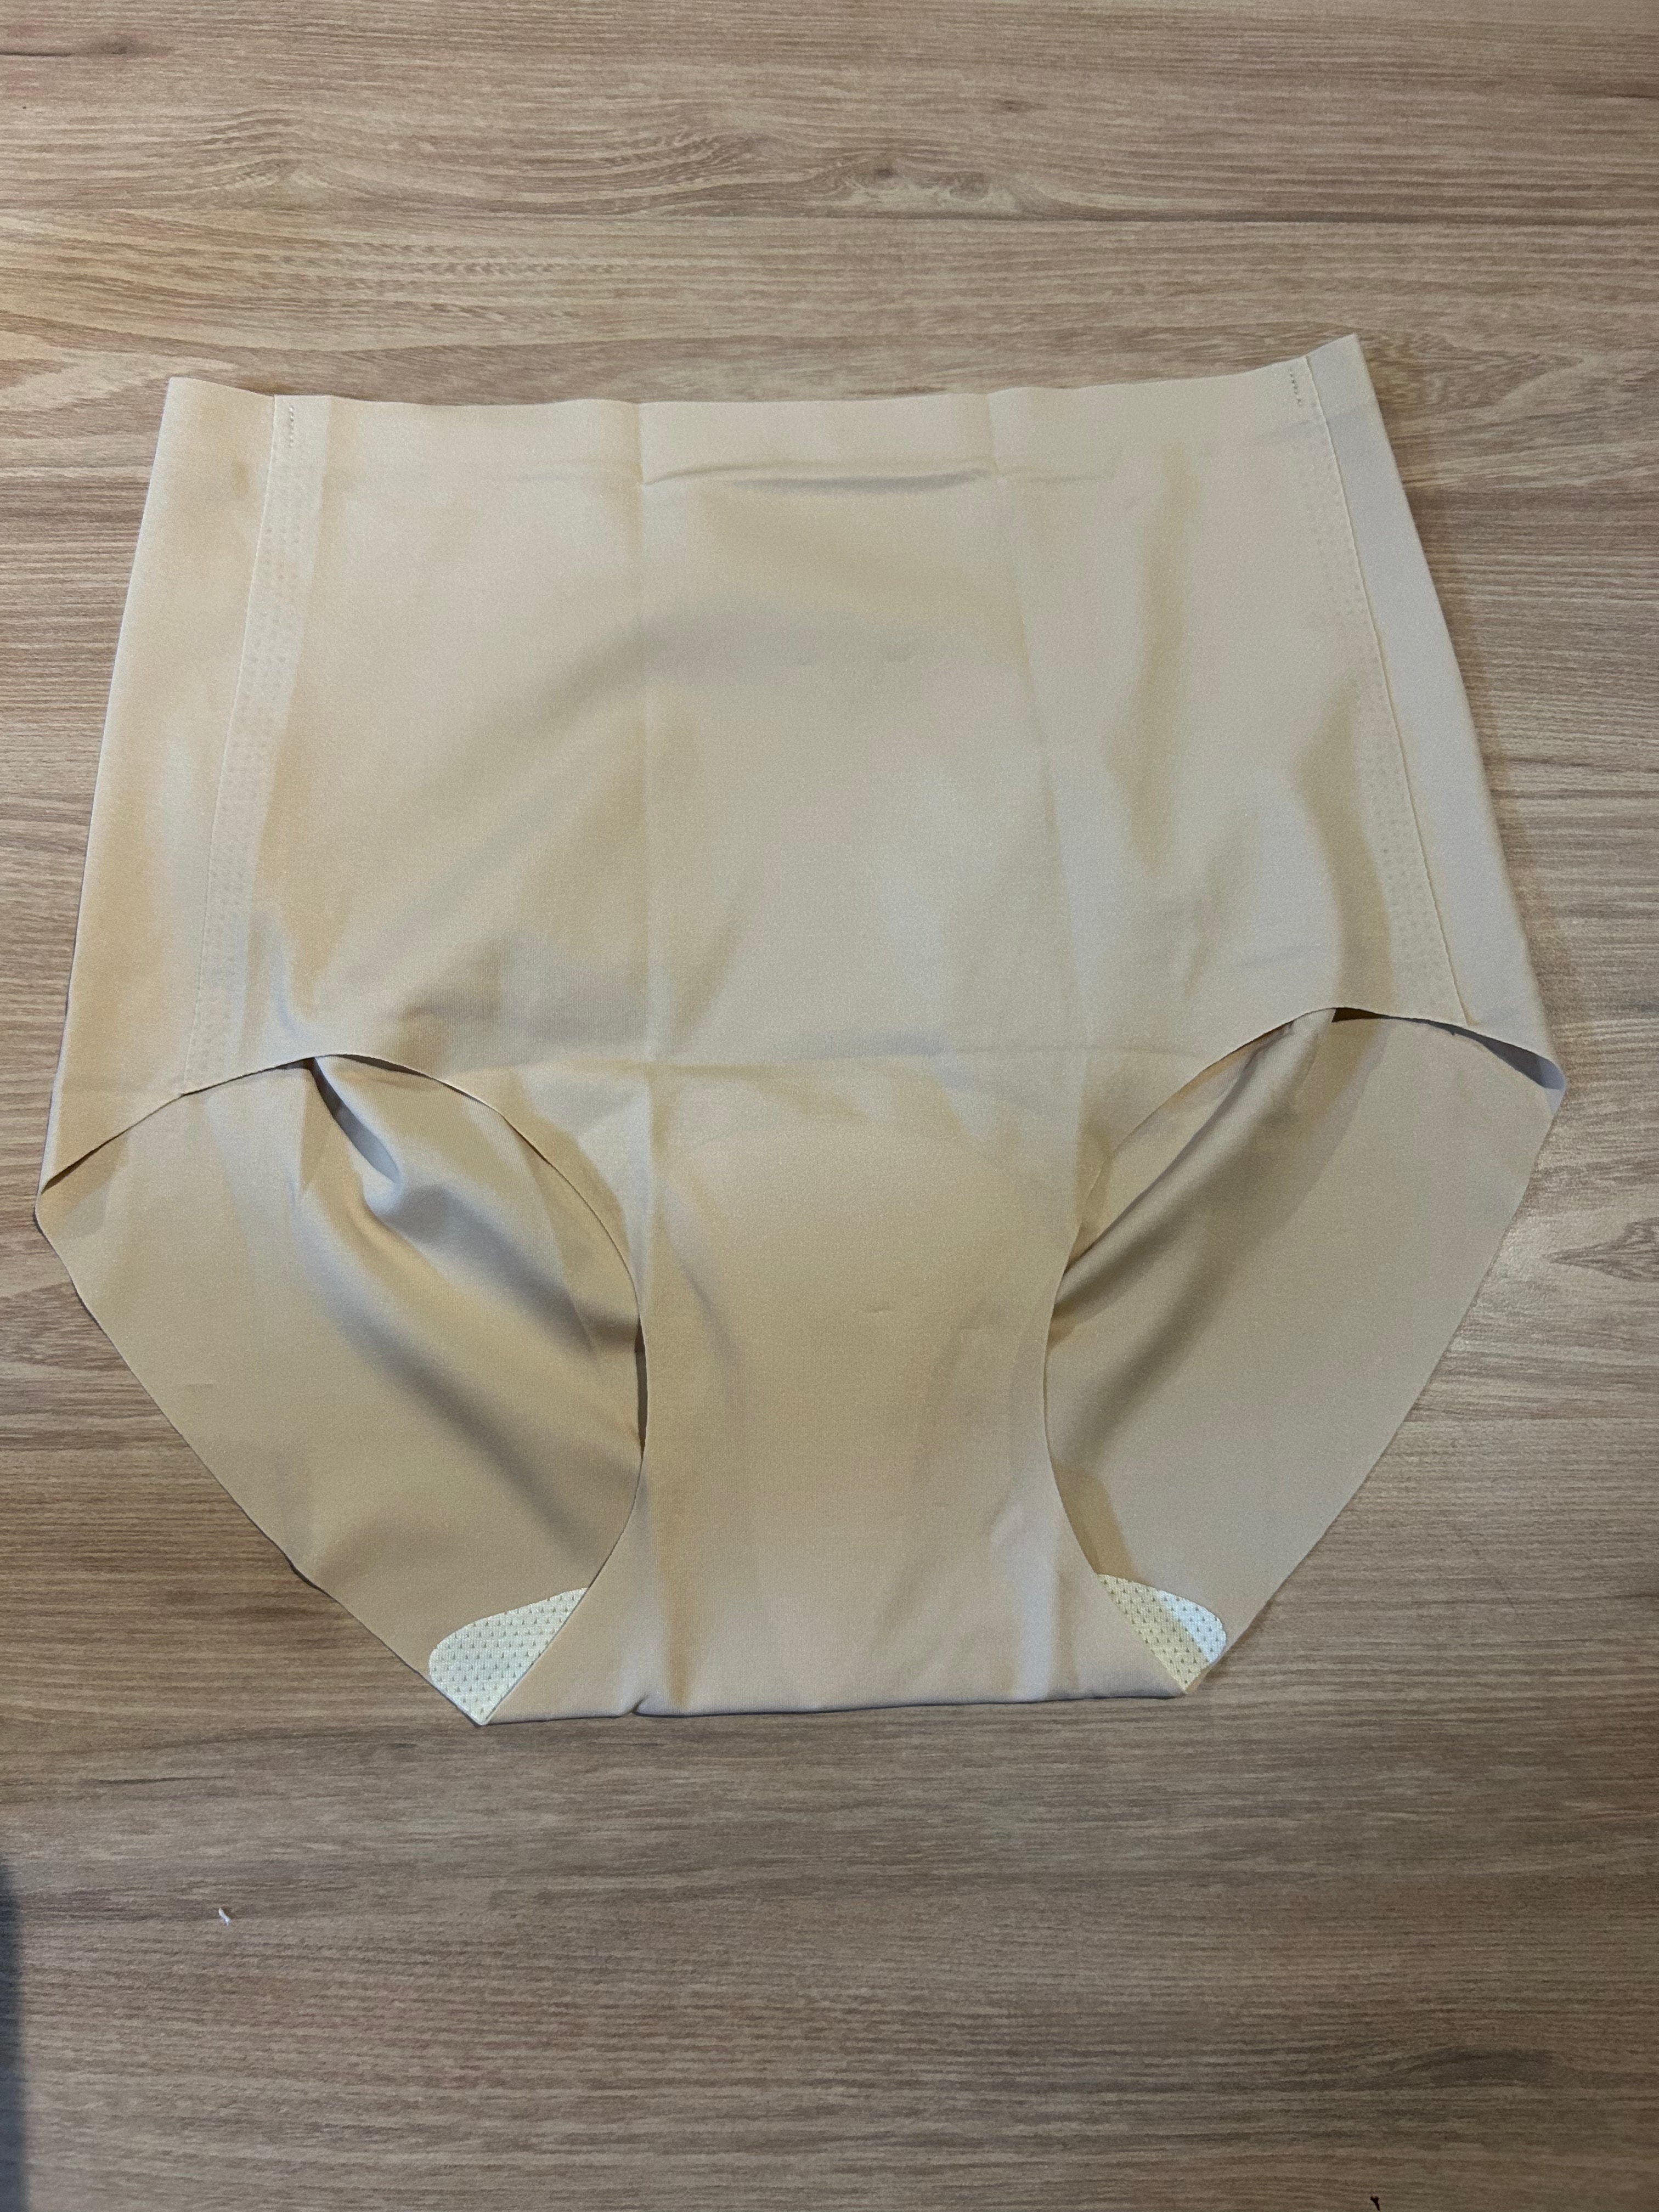 Everyday anti camel toe panties (do not use hot water to wash) - stick true to size